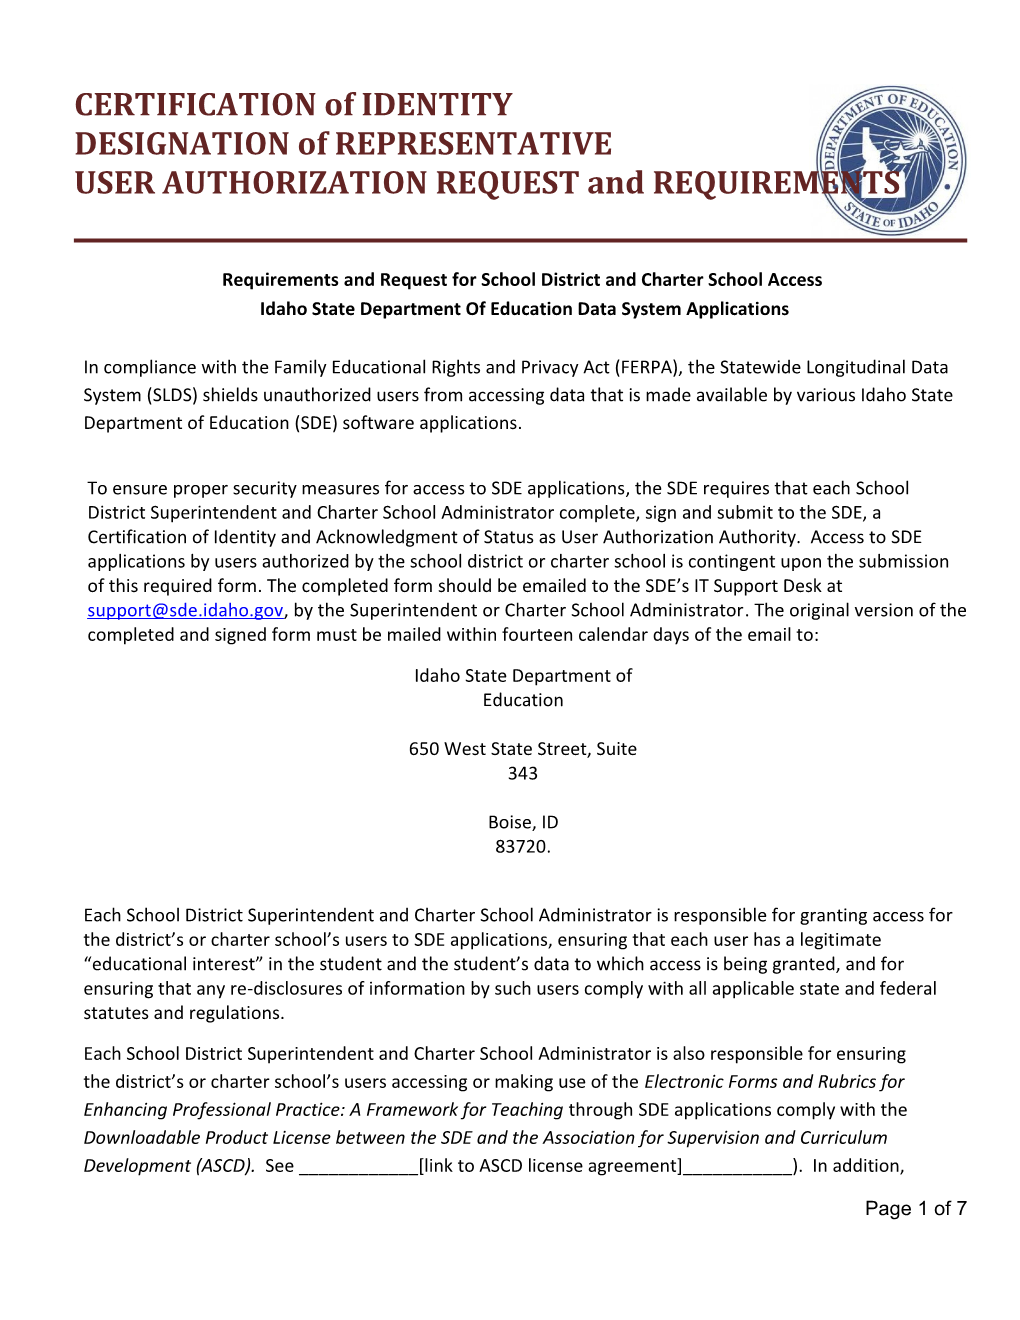 USER AUTHORIZATION REQUEST and REQUIREMENTS